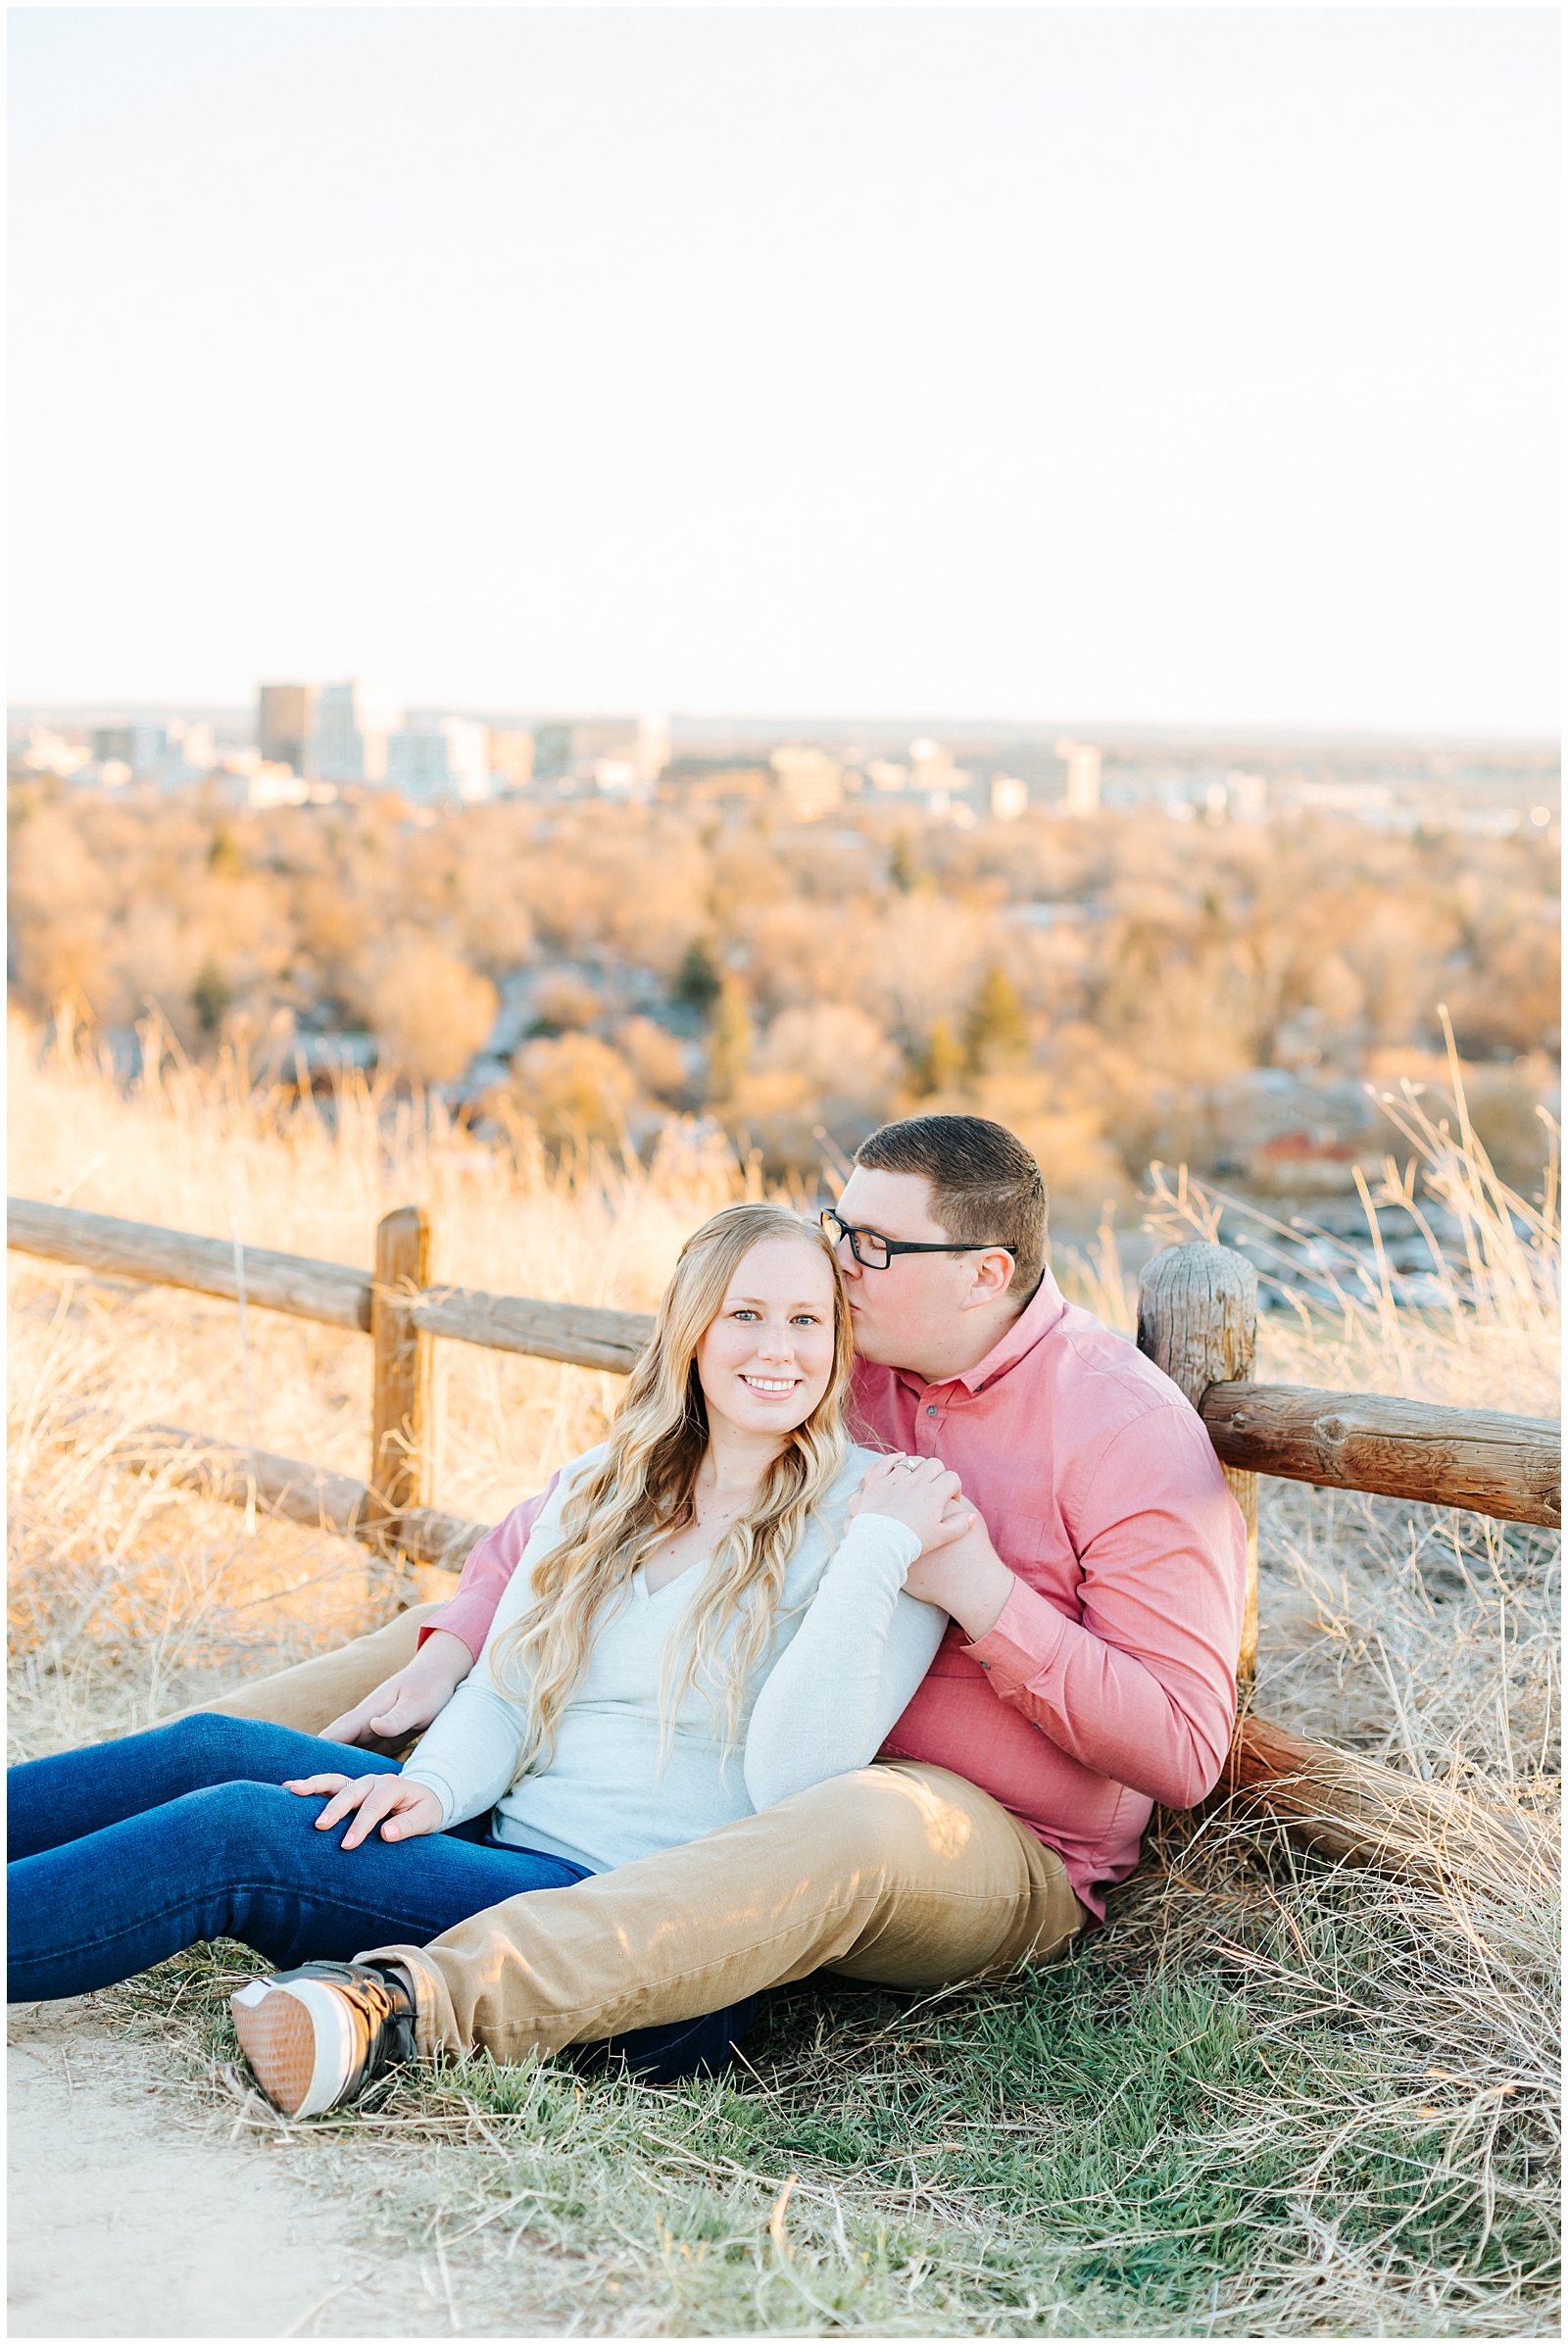 Spring Engagement Session at Camel's Back Park overlooking Boise Idaho